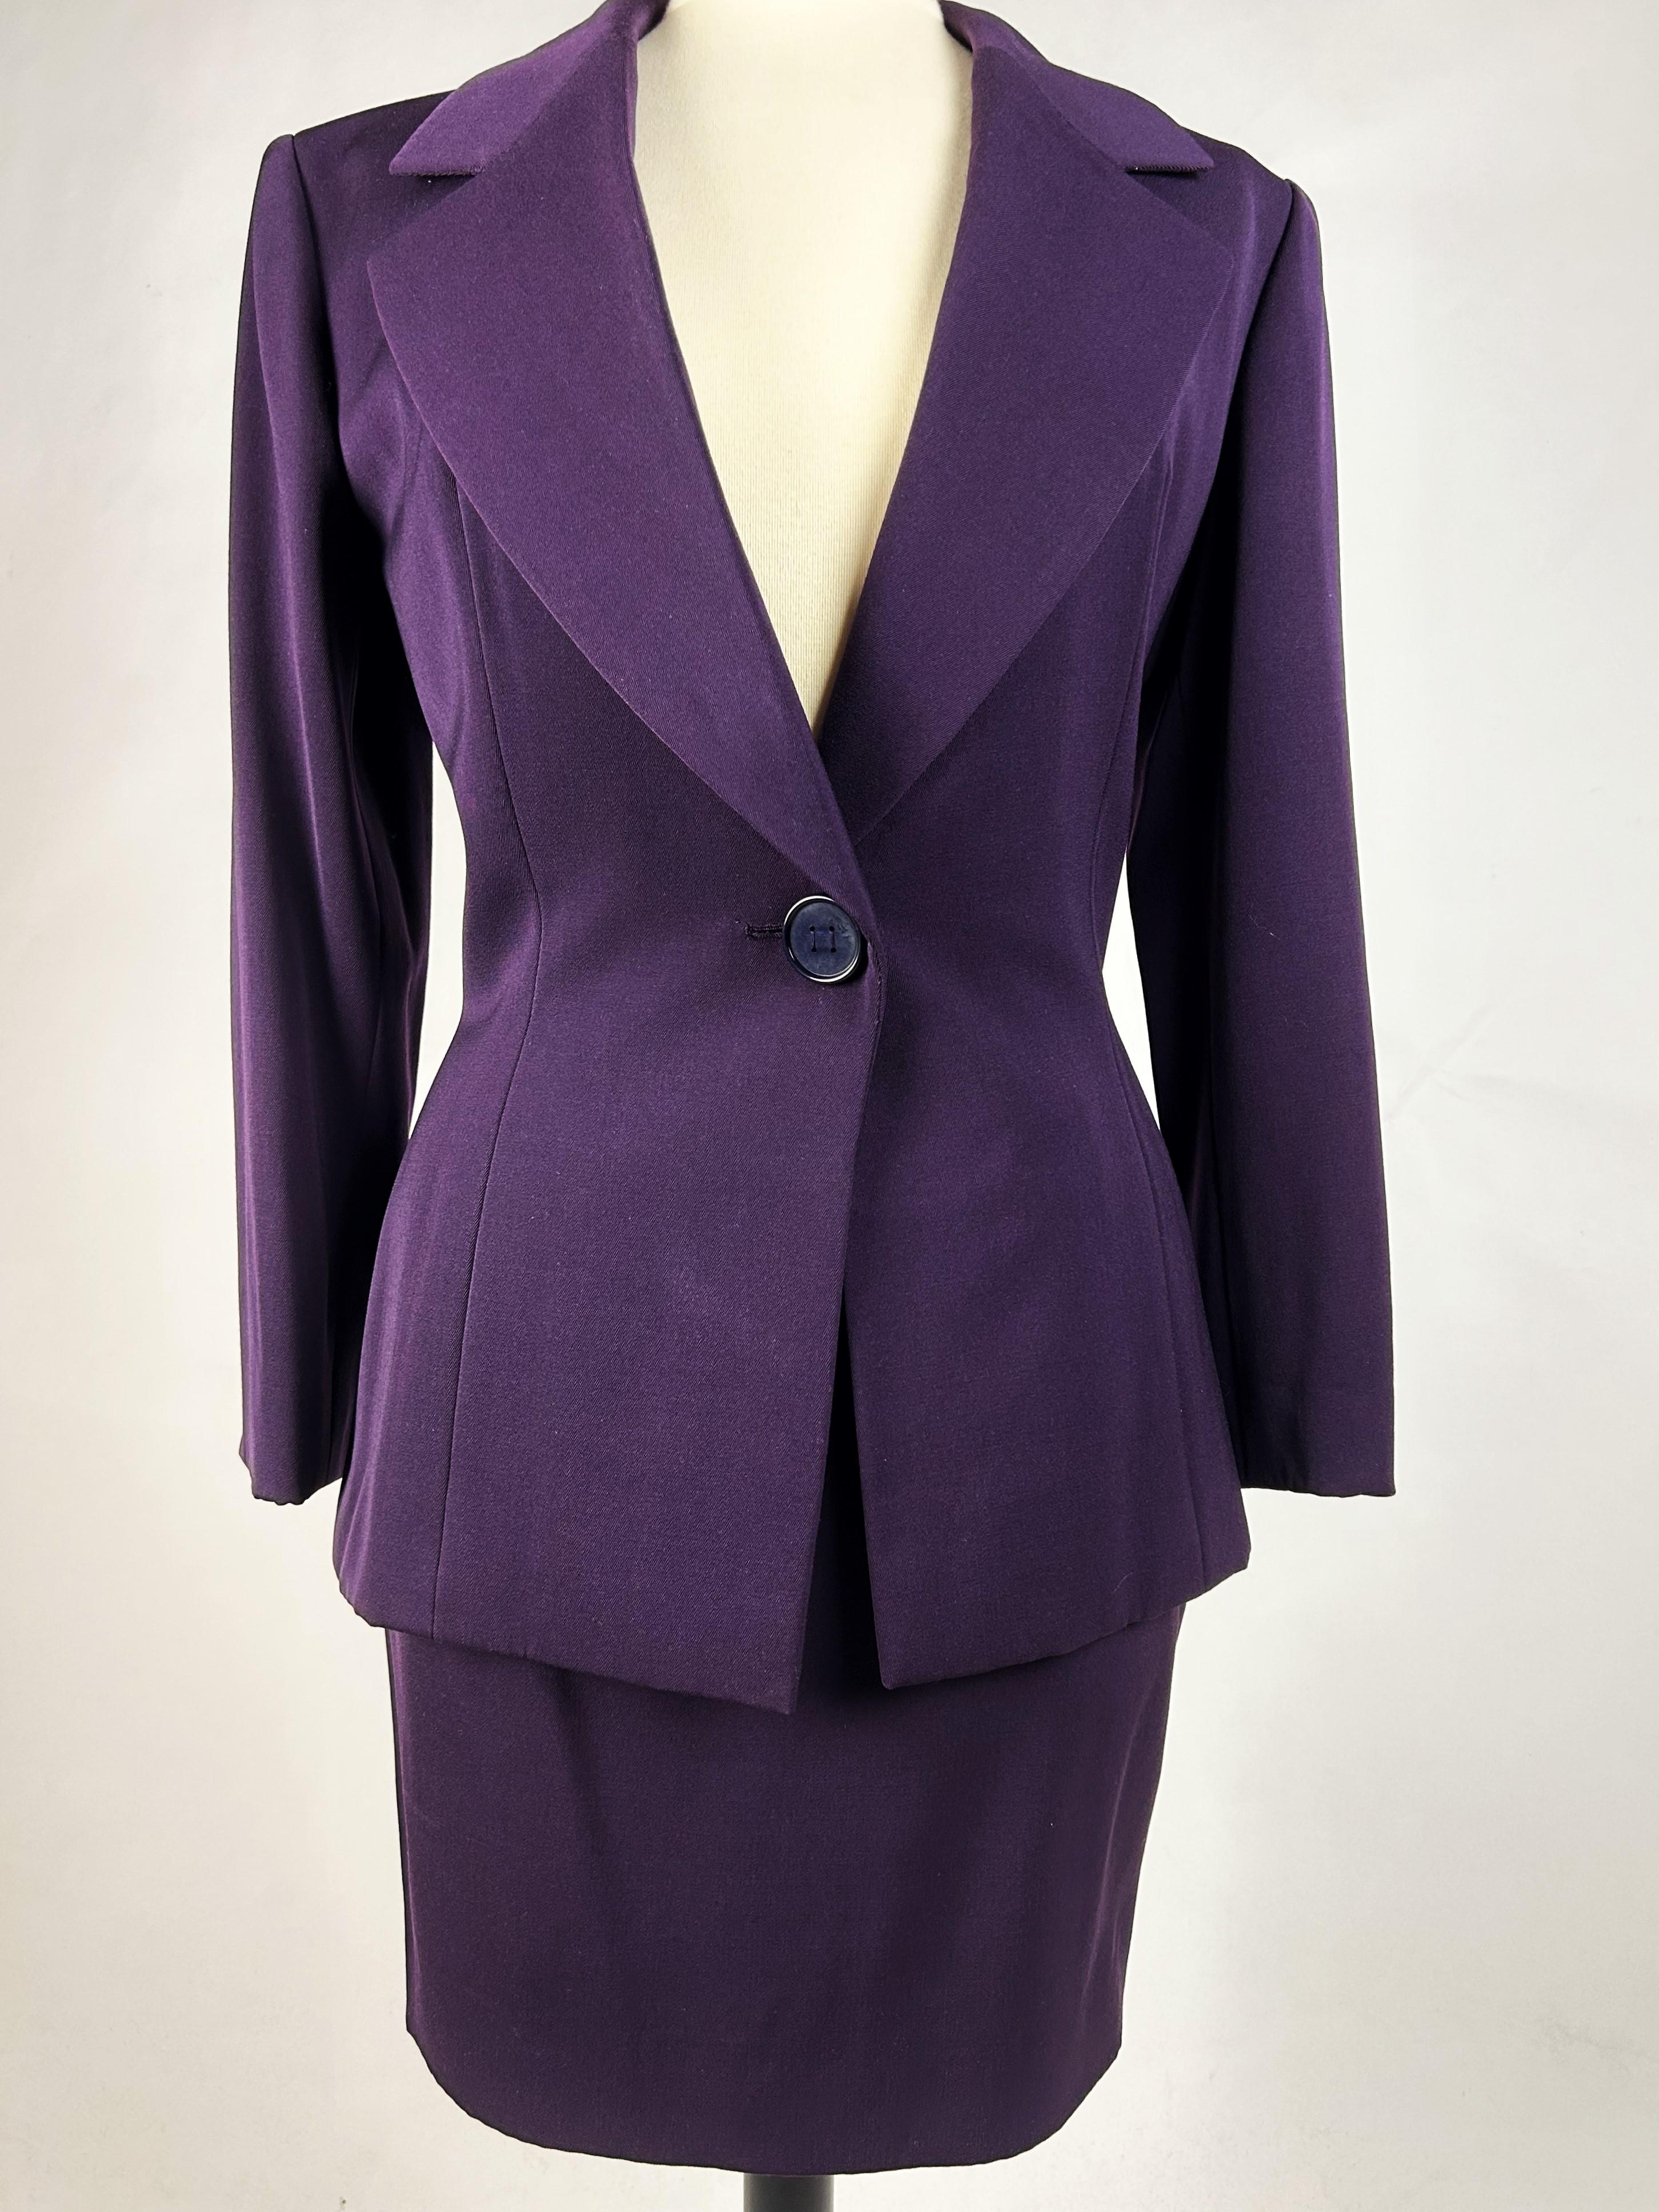 Skirt suit by Gianfranco Ferré for Christian Dior Haute Couture Circa 1995 For Sale 2